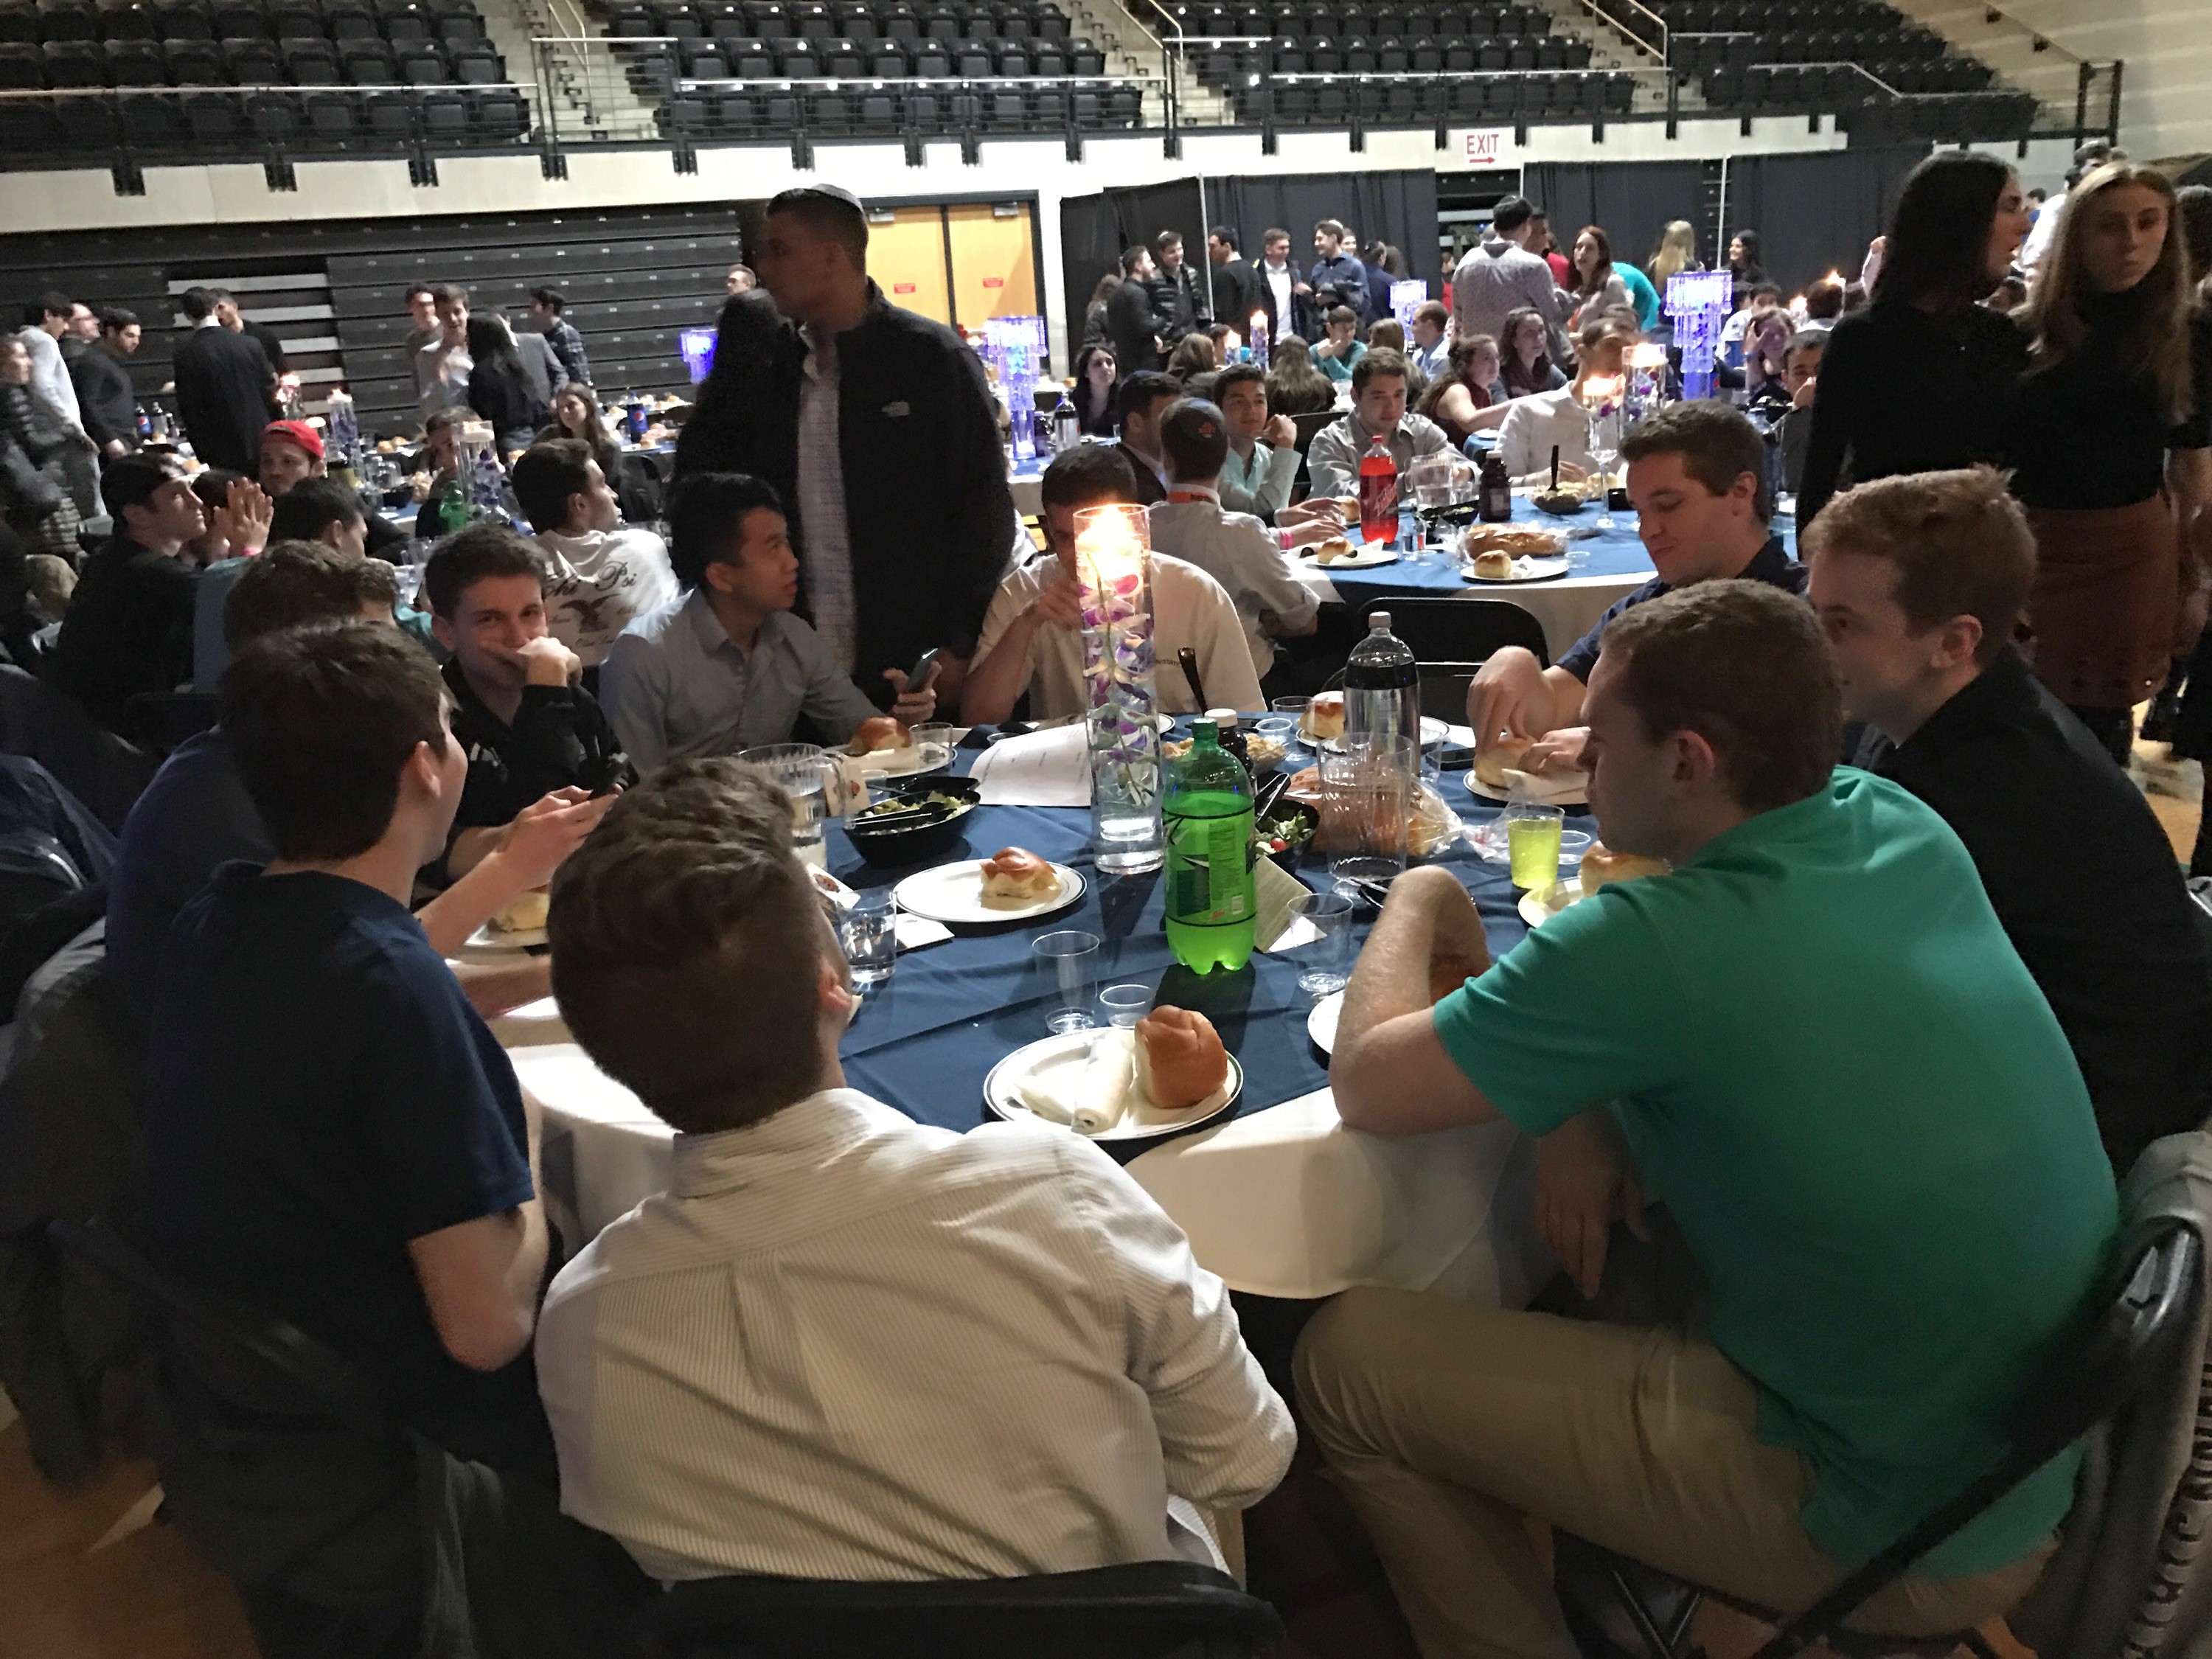 Shabbat dinner brings together old, new friends during NHBT